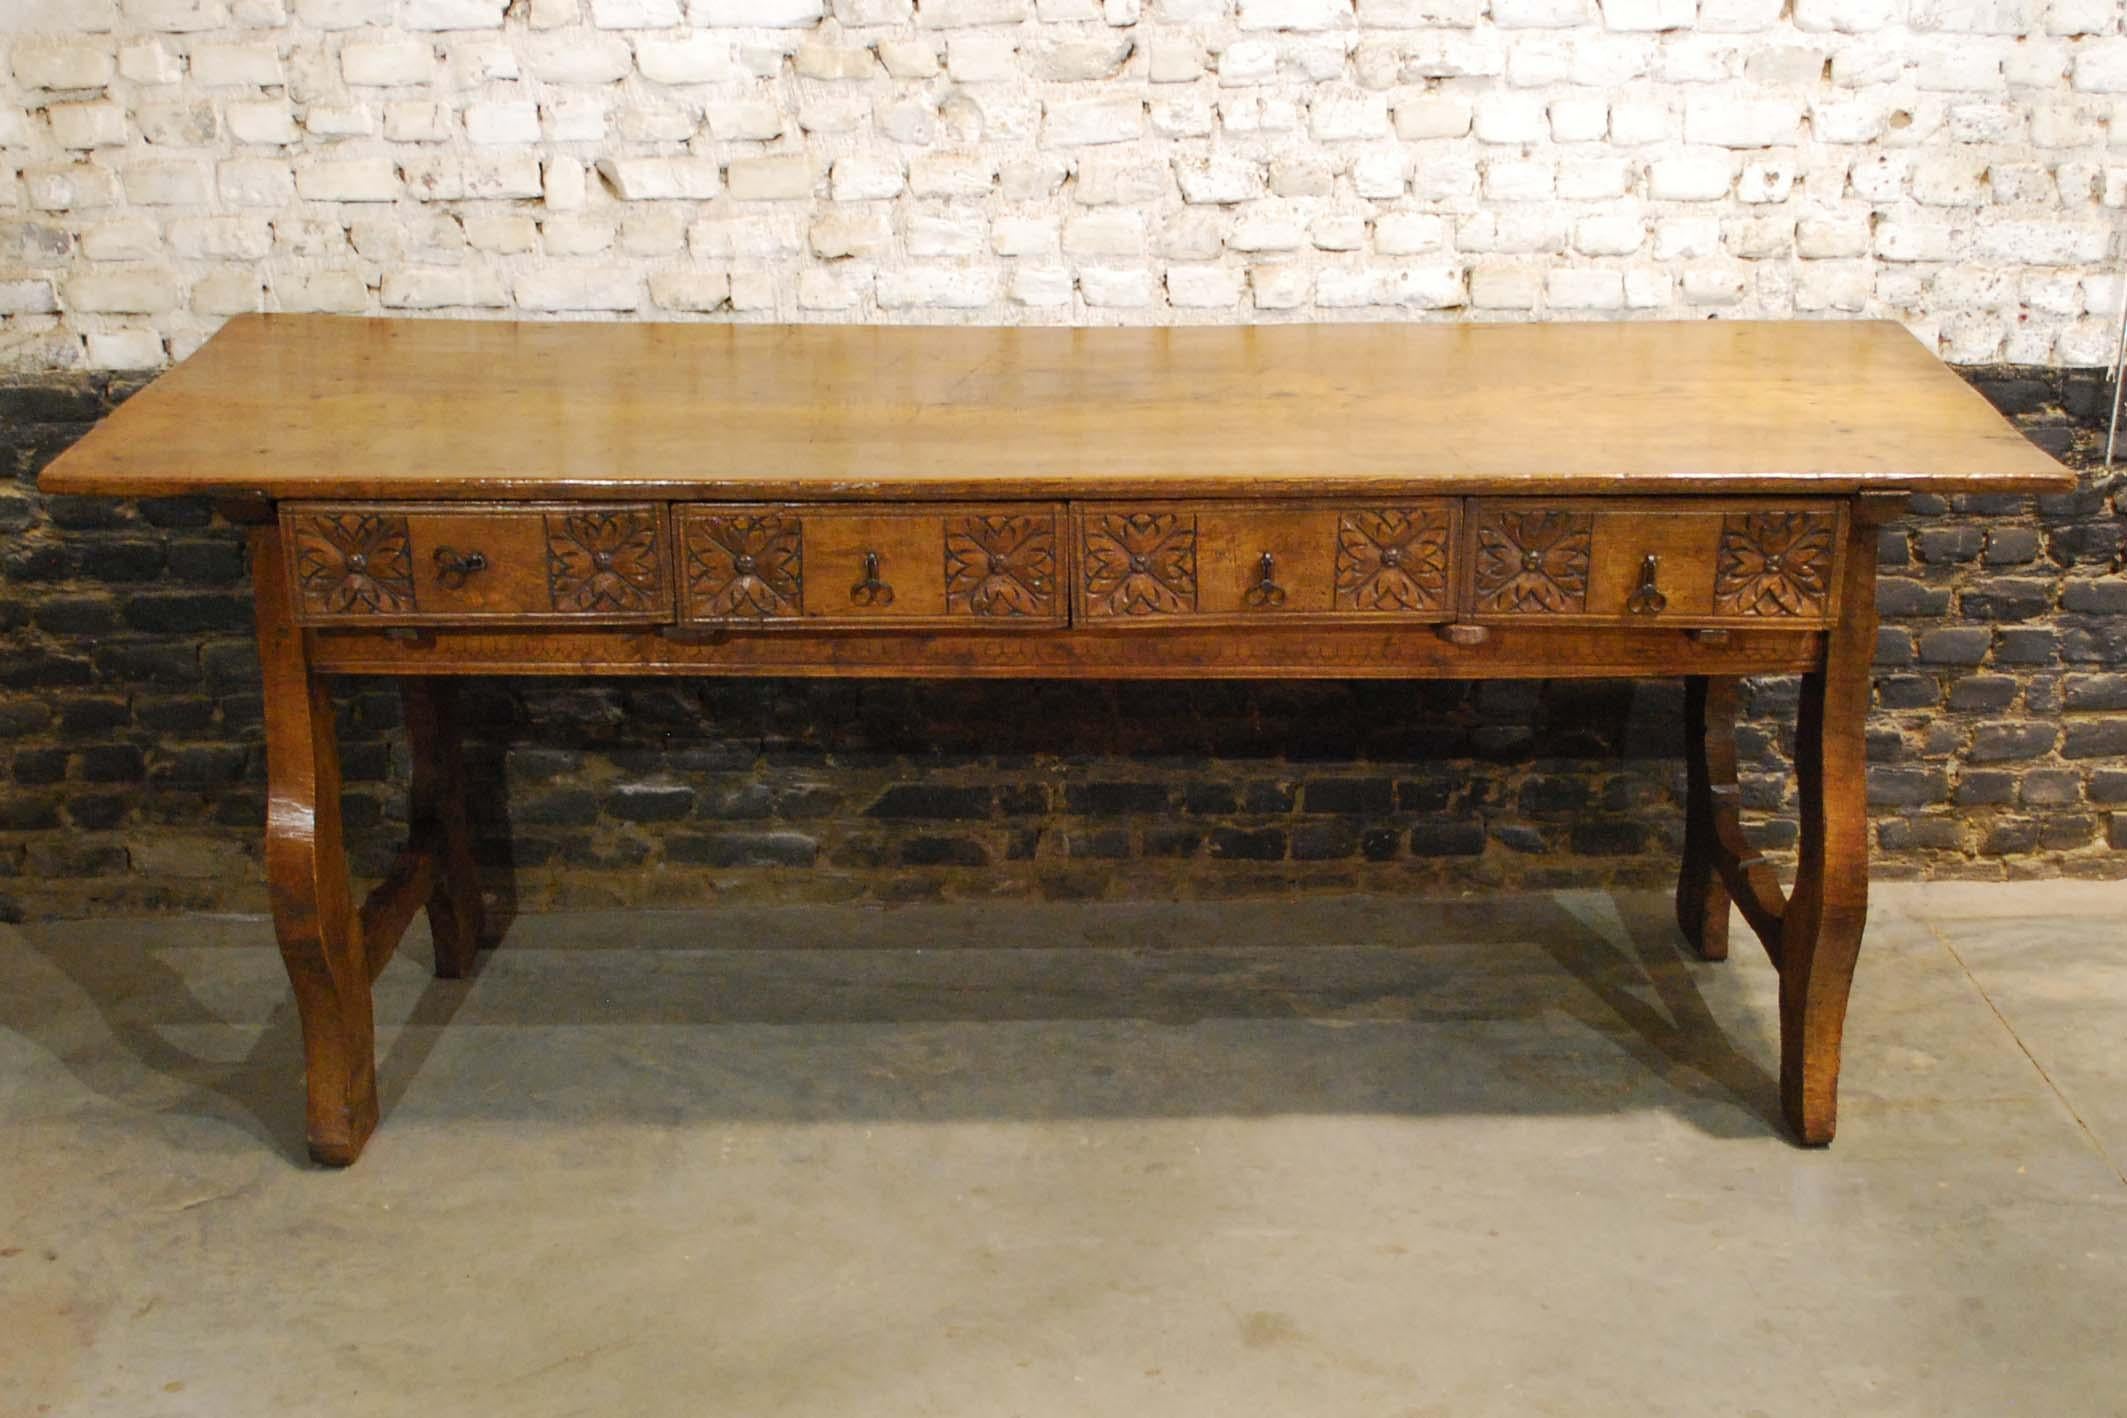 A beautiful and very authentic Spanish Baroque style chestnut table from the early 19th century. 
The table features four drawers with geometric hand carved flowers on the front panels. The hand forged drawer pulls are original to this writing